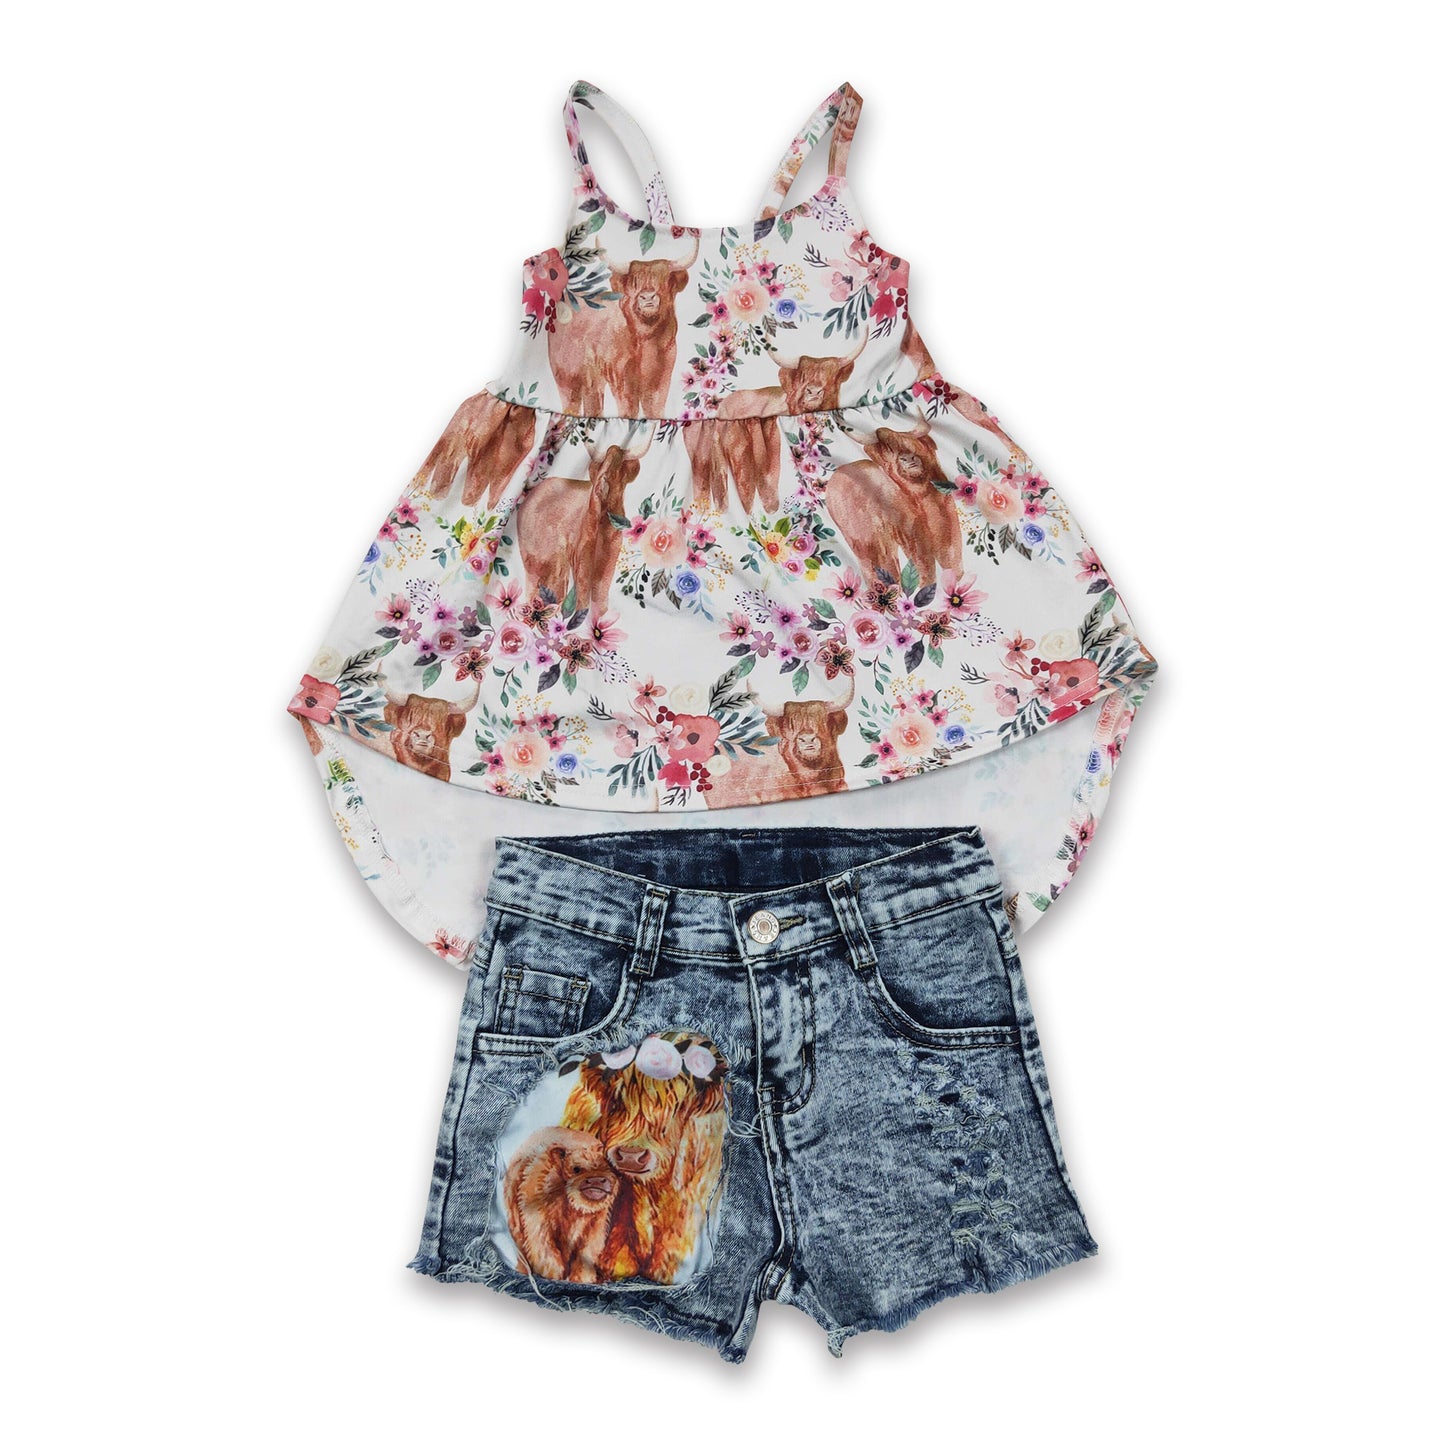 Highland cow high-low top denim shorts girls clothes